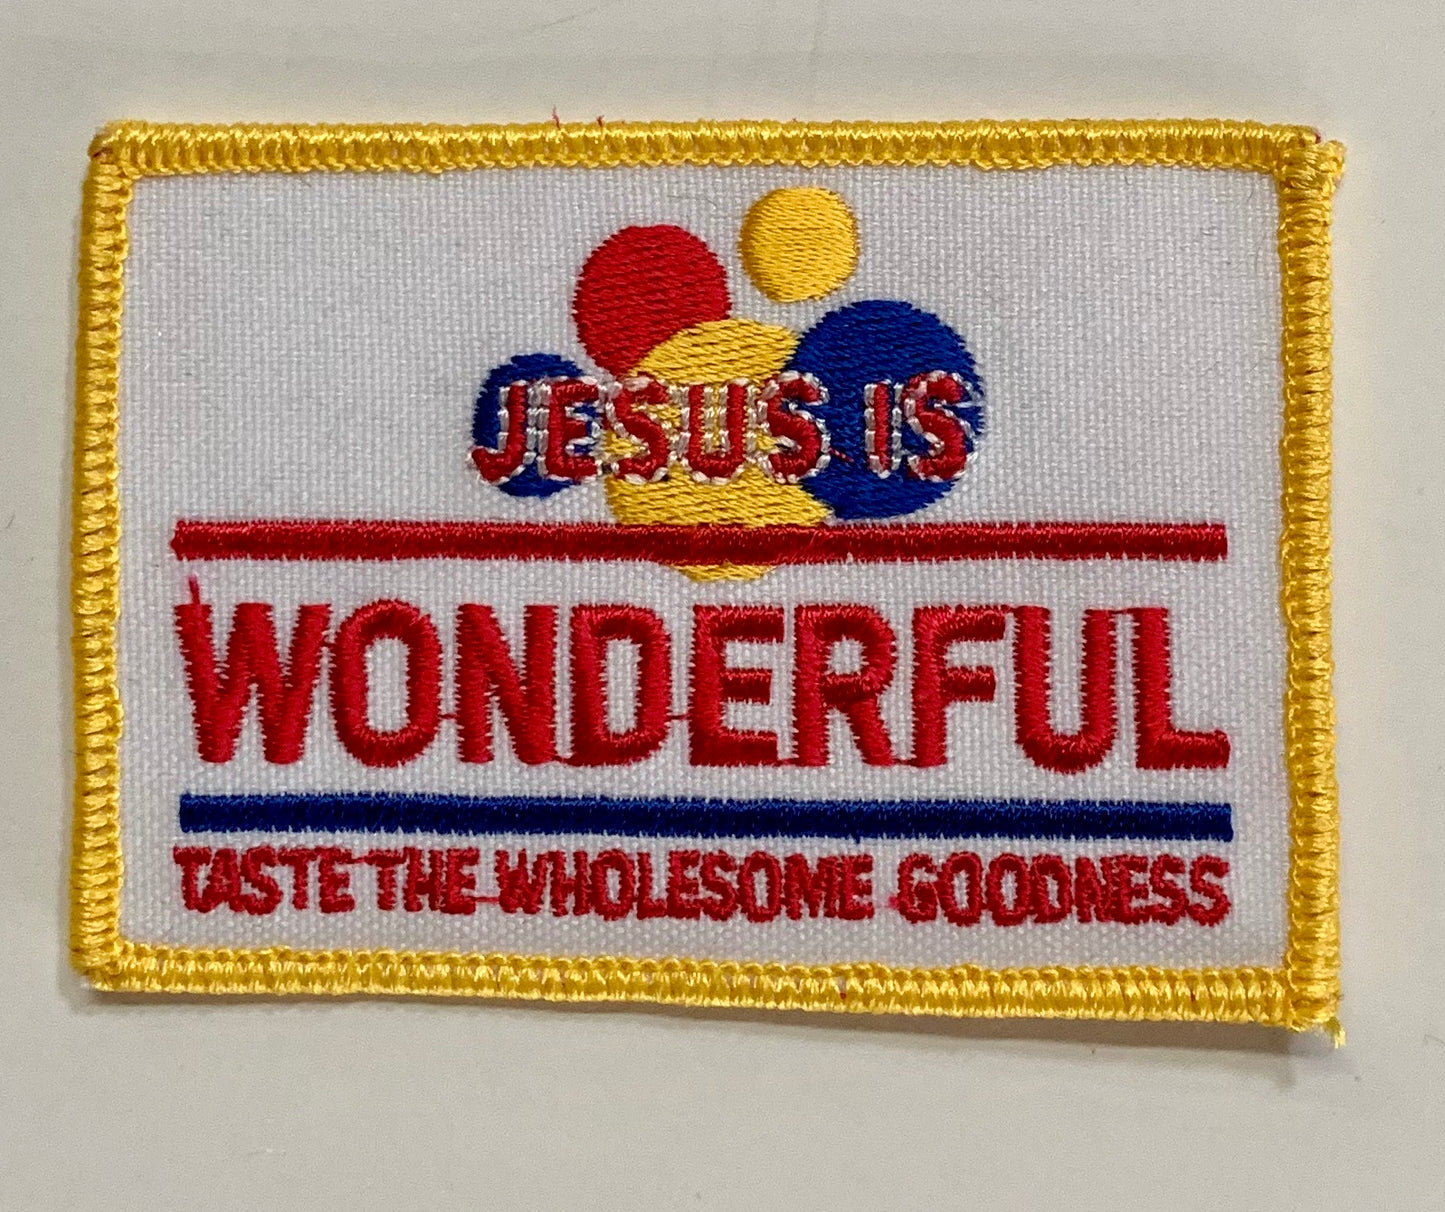 Wonderful-Embroidered Patch